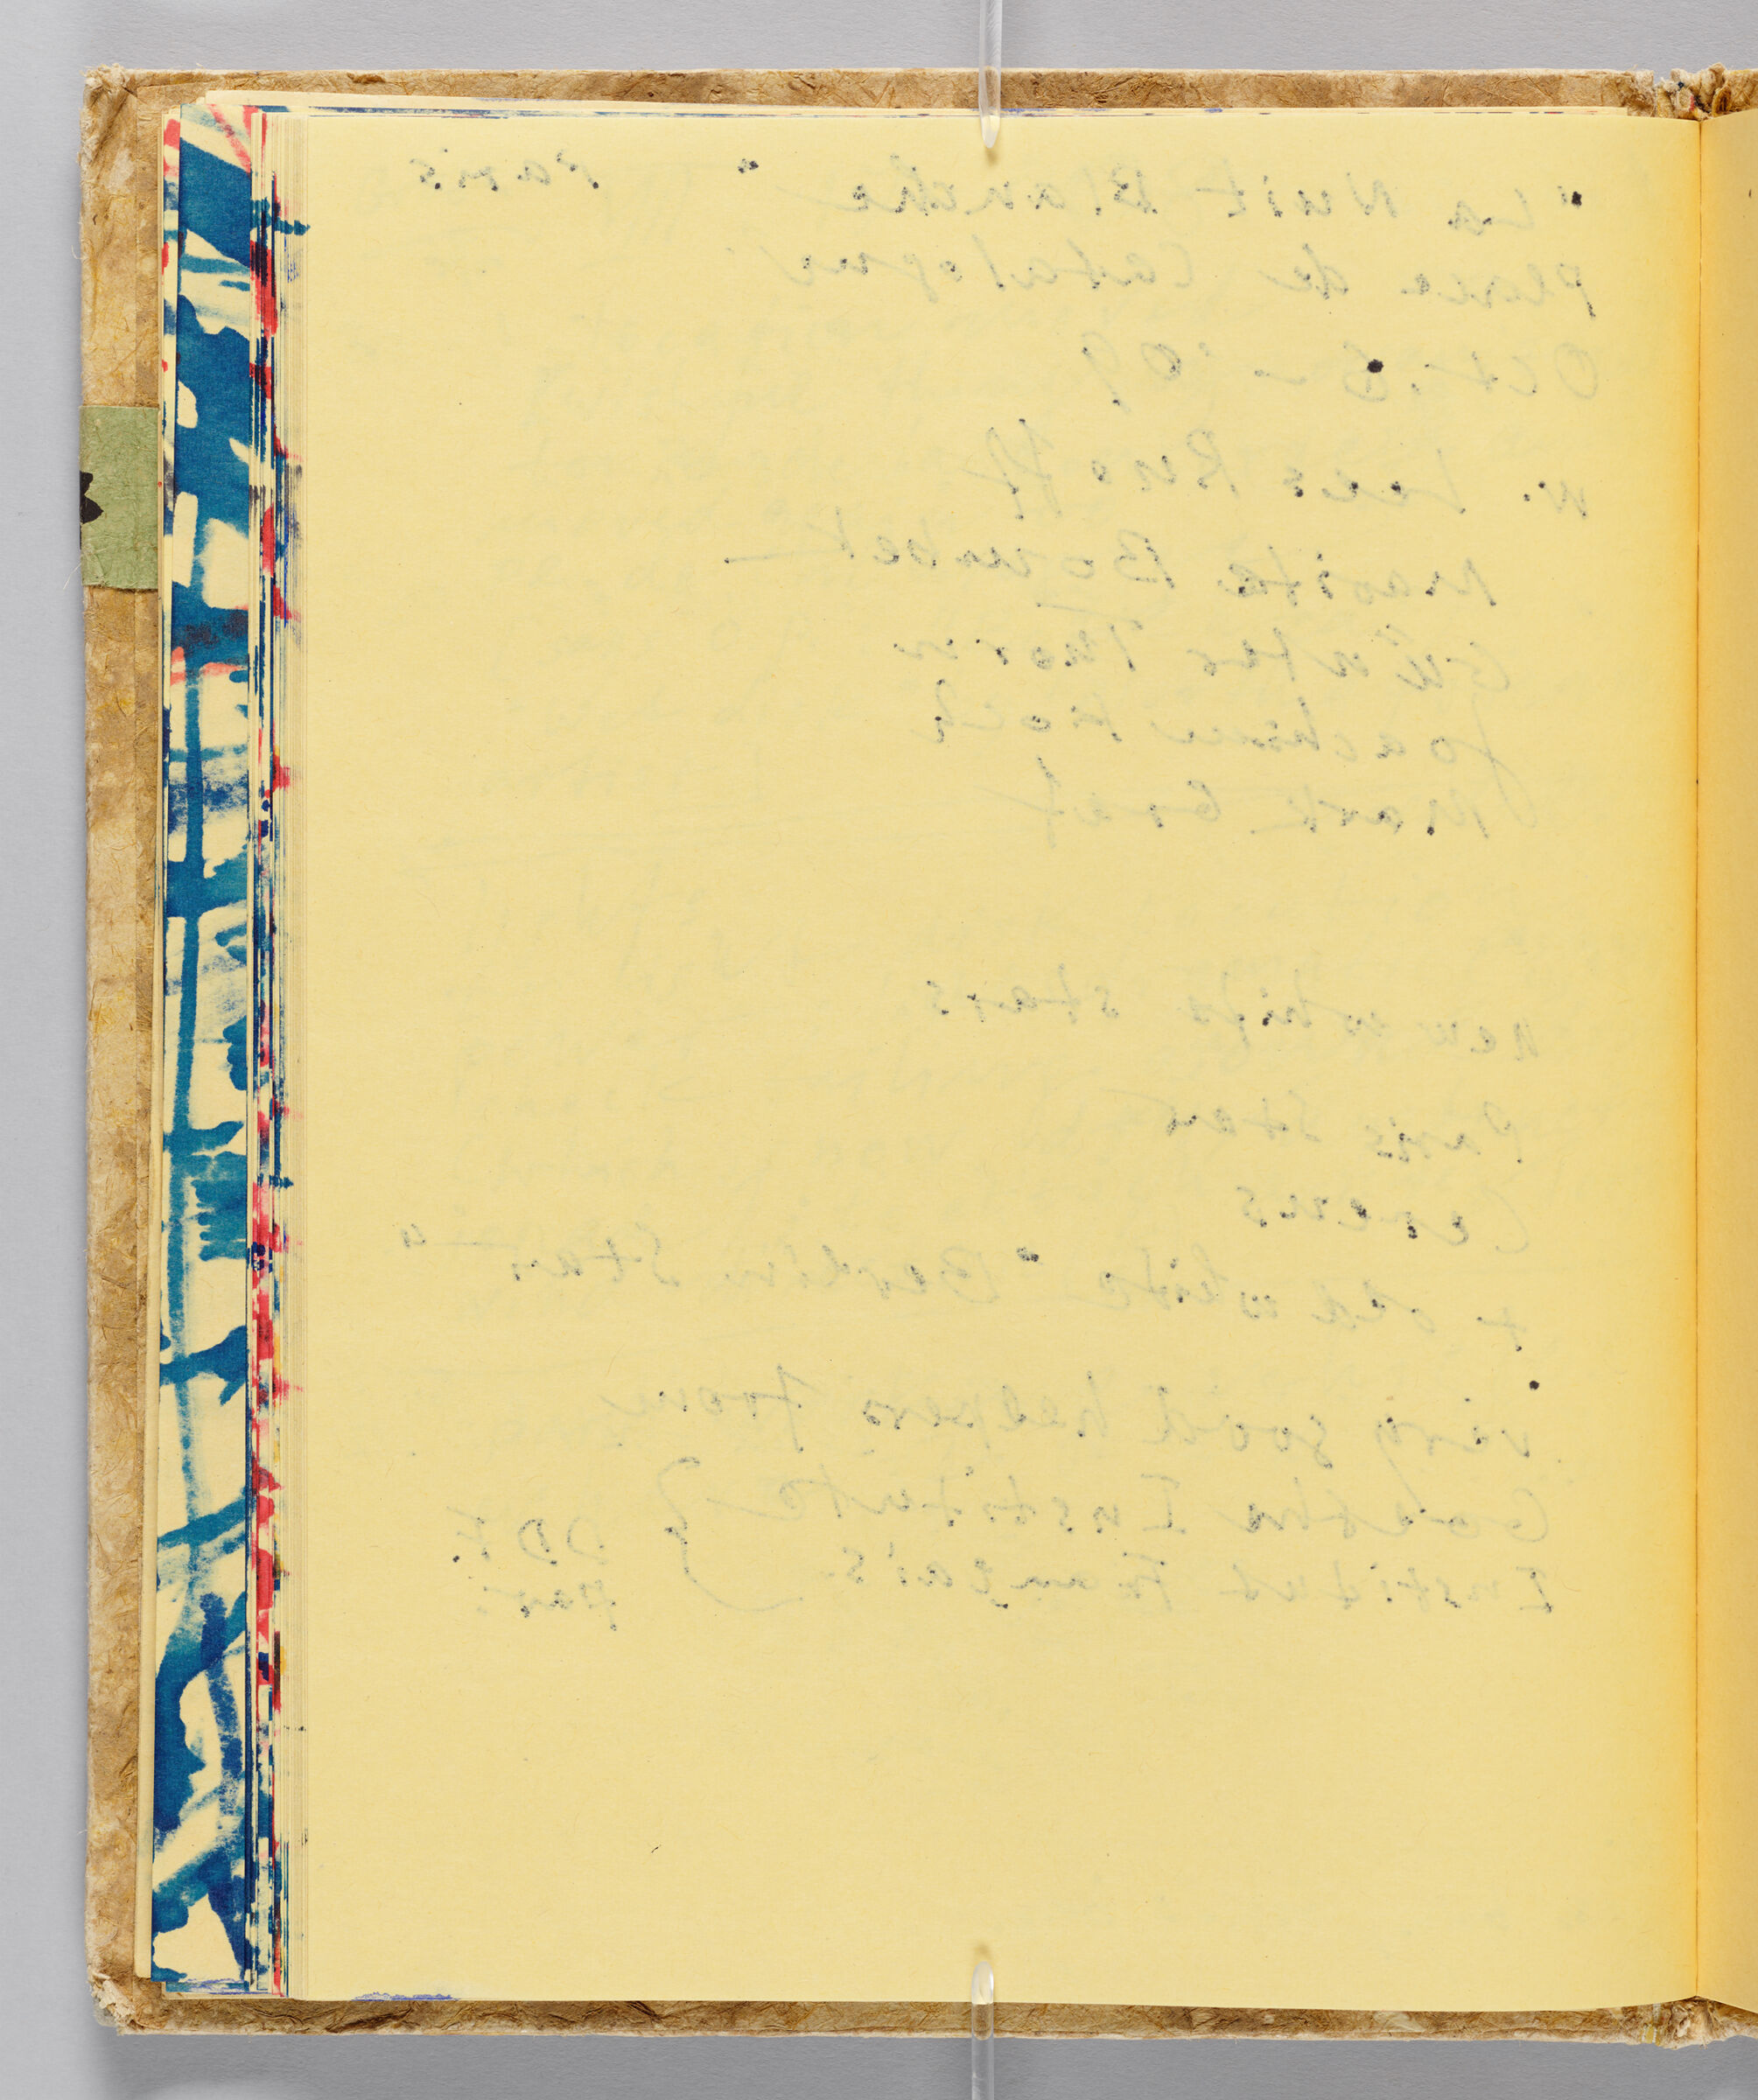 Untitled (Bleed-Through Of Previous Page, Left Page); Untitled (Blank, Right Page)